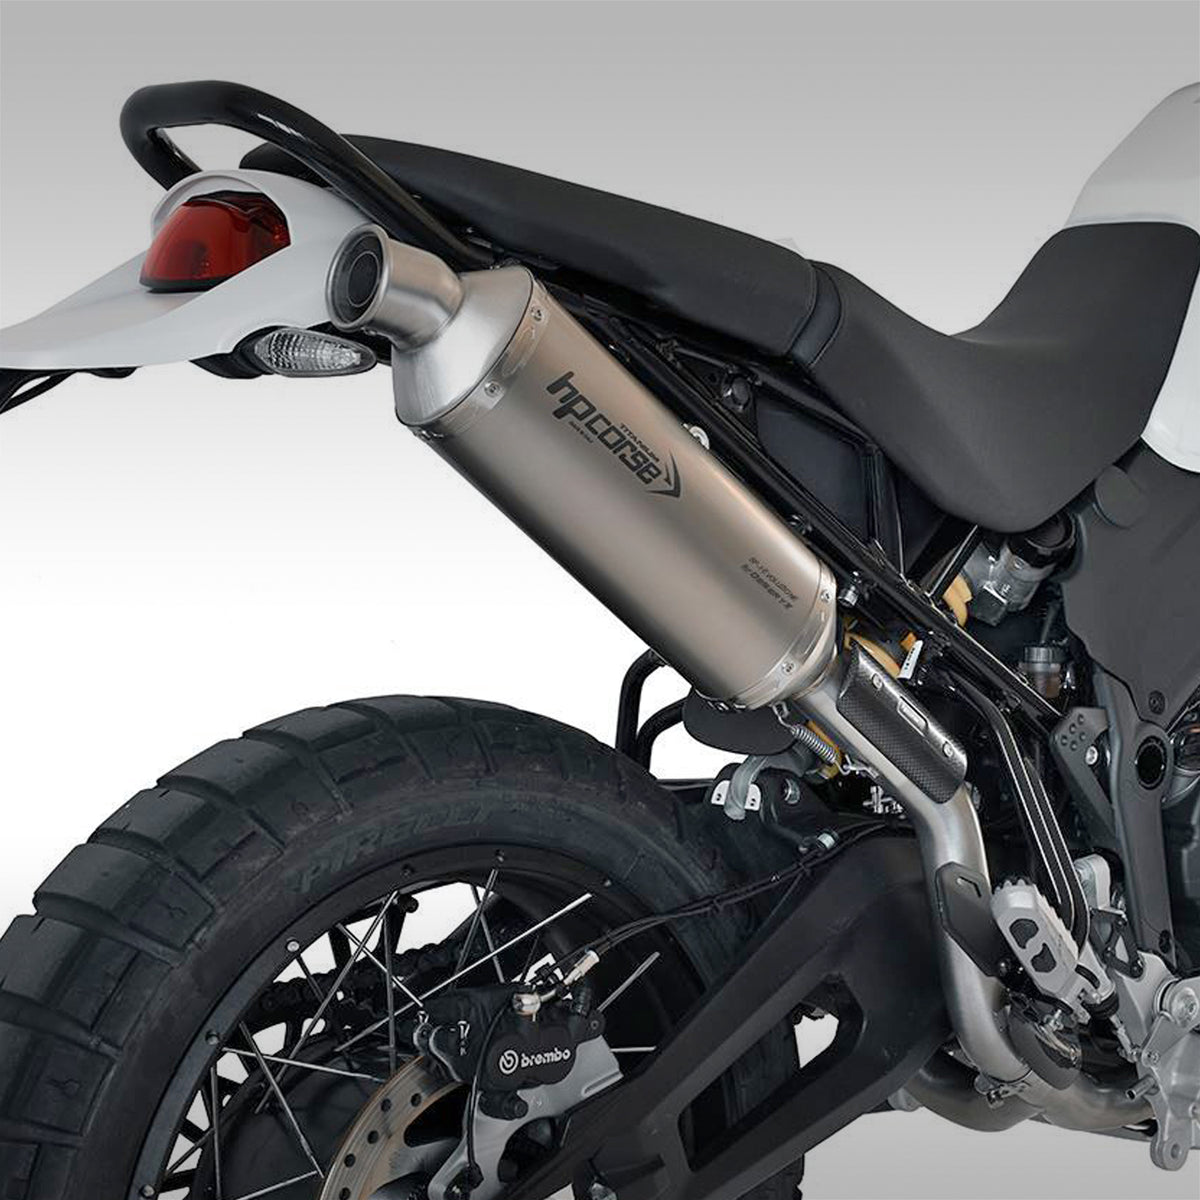 HP CORSE exhaust for the Ducati Desert X. This is the SP-1 high mount slip-on option. Hand made in Italy using Titanium for light weight, durability and great looks. 